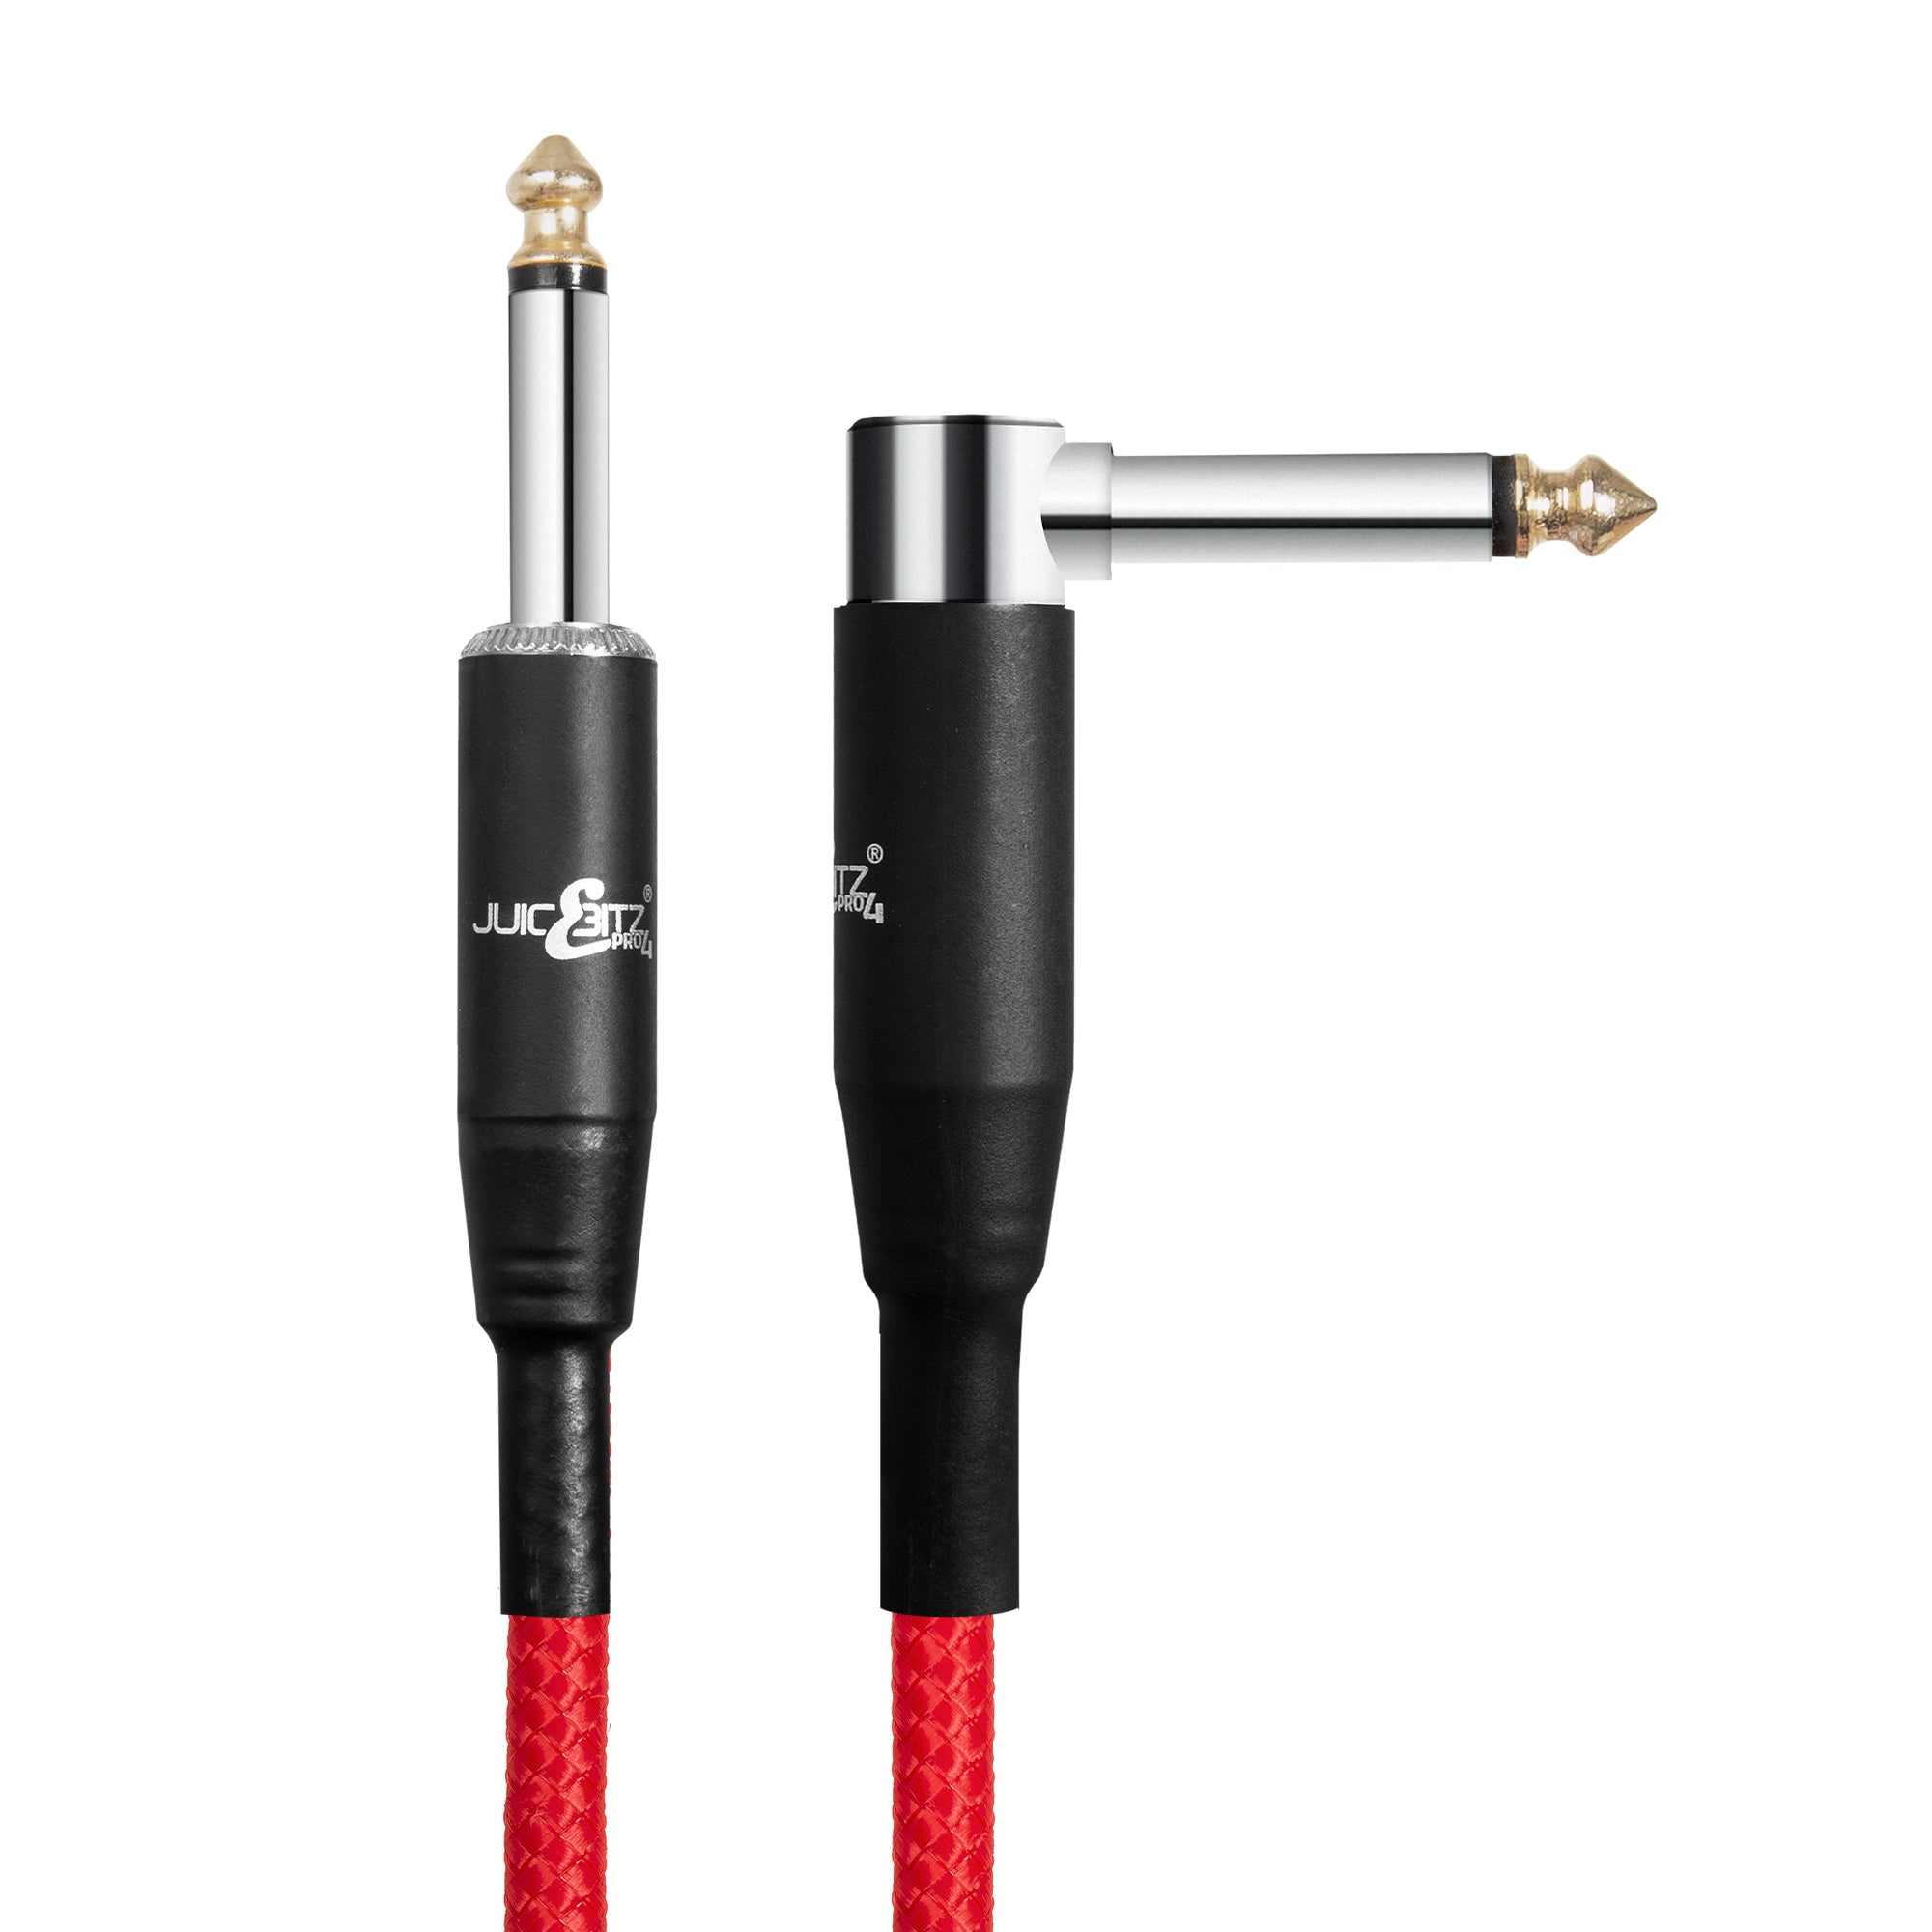 PRO Series Braided Guitar Cable 1/4" Straight/Angled Jack to Jack 6.35mm Lead - Red